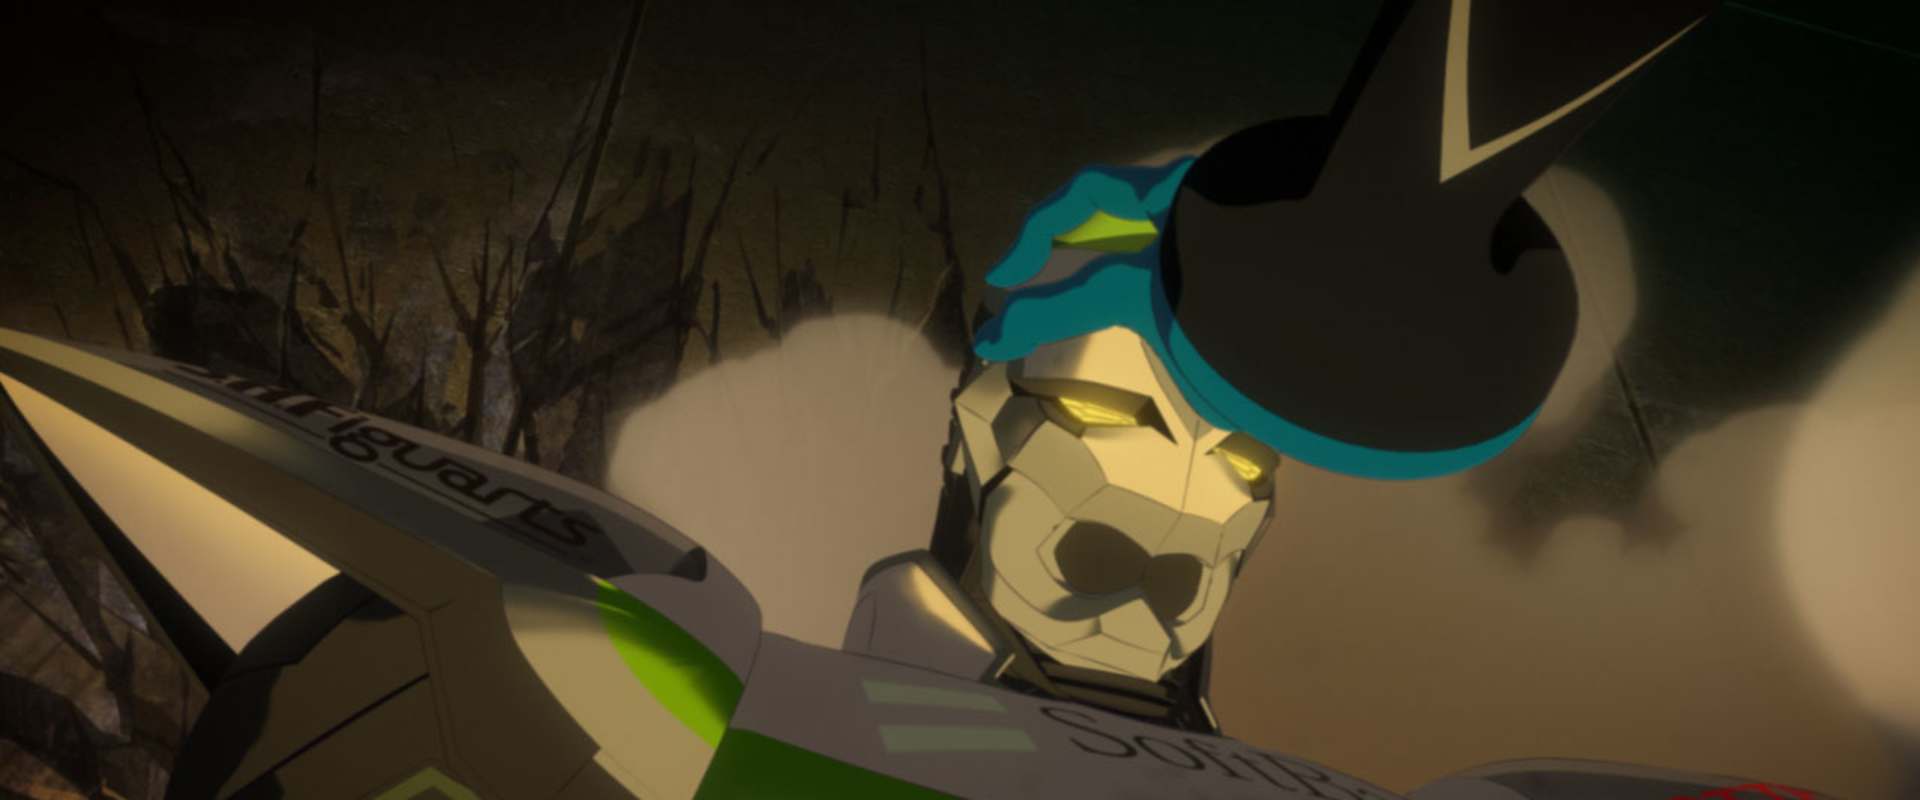 Tiger & Bunny: The Rising background 1